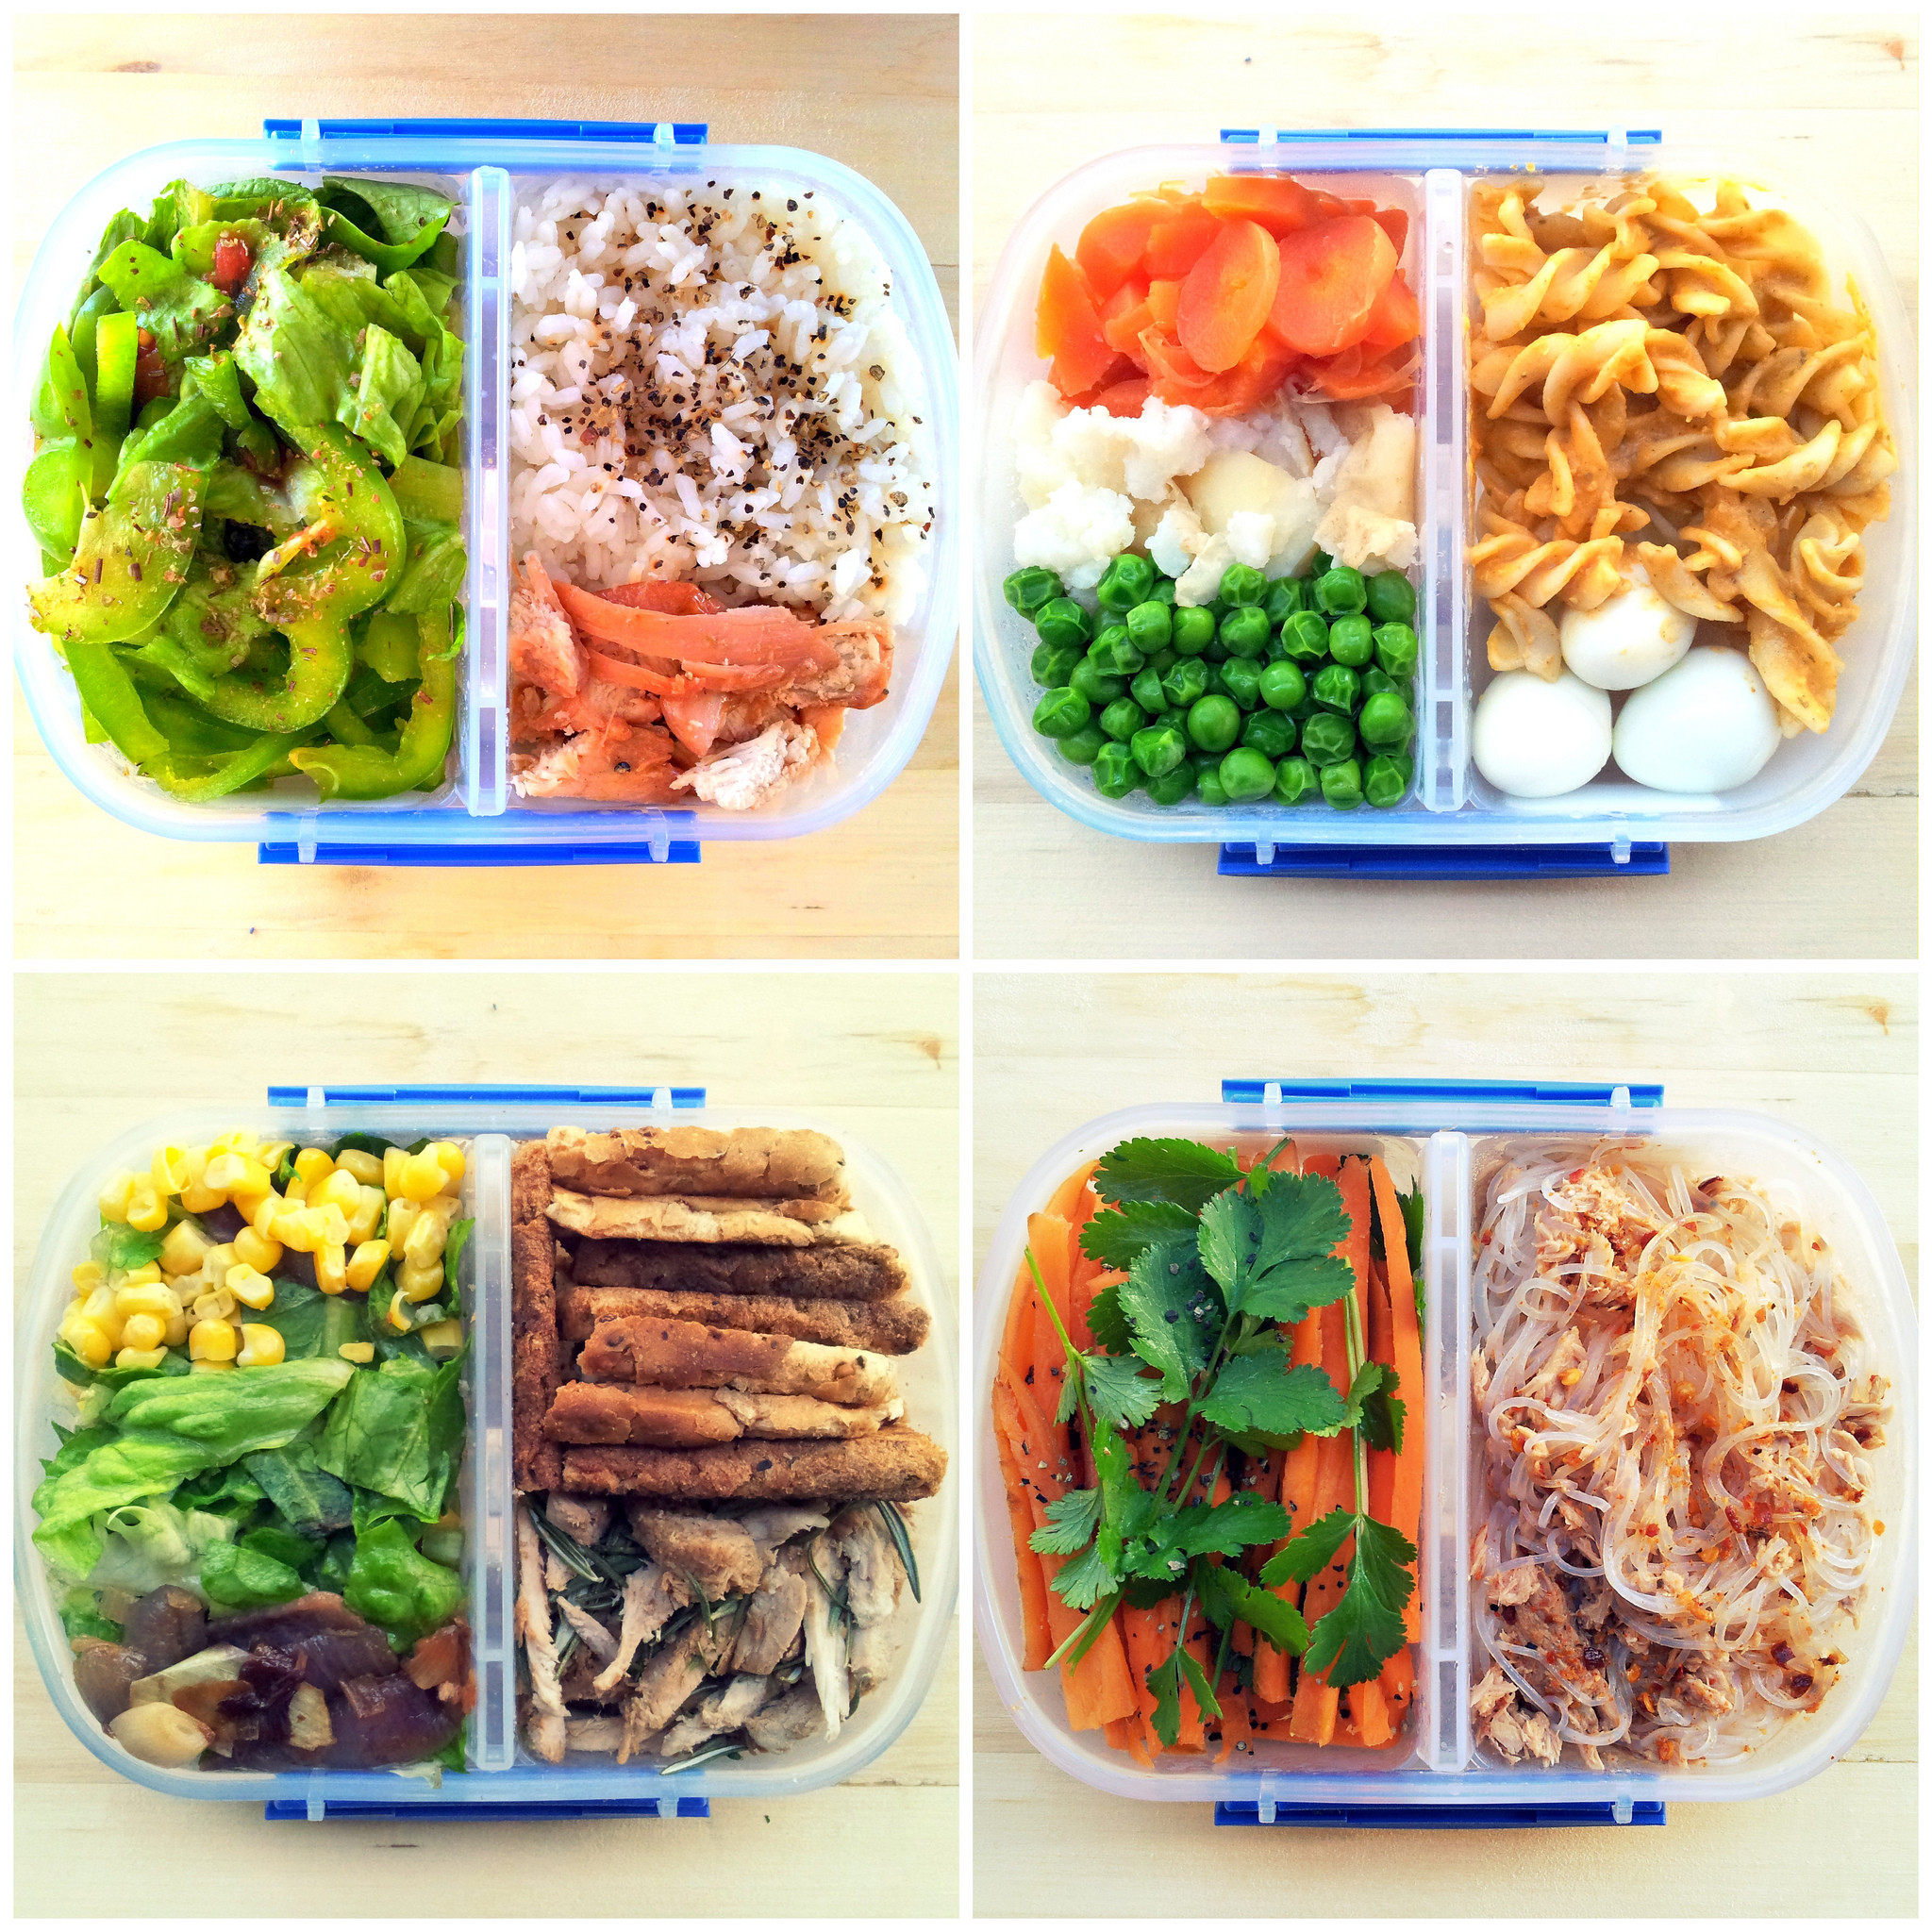 Healthy Low Calorie Lunches To Take To Work
 How to Pack a Healthy Lunch for Work